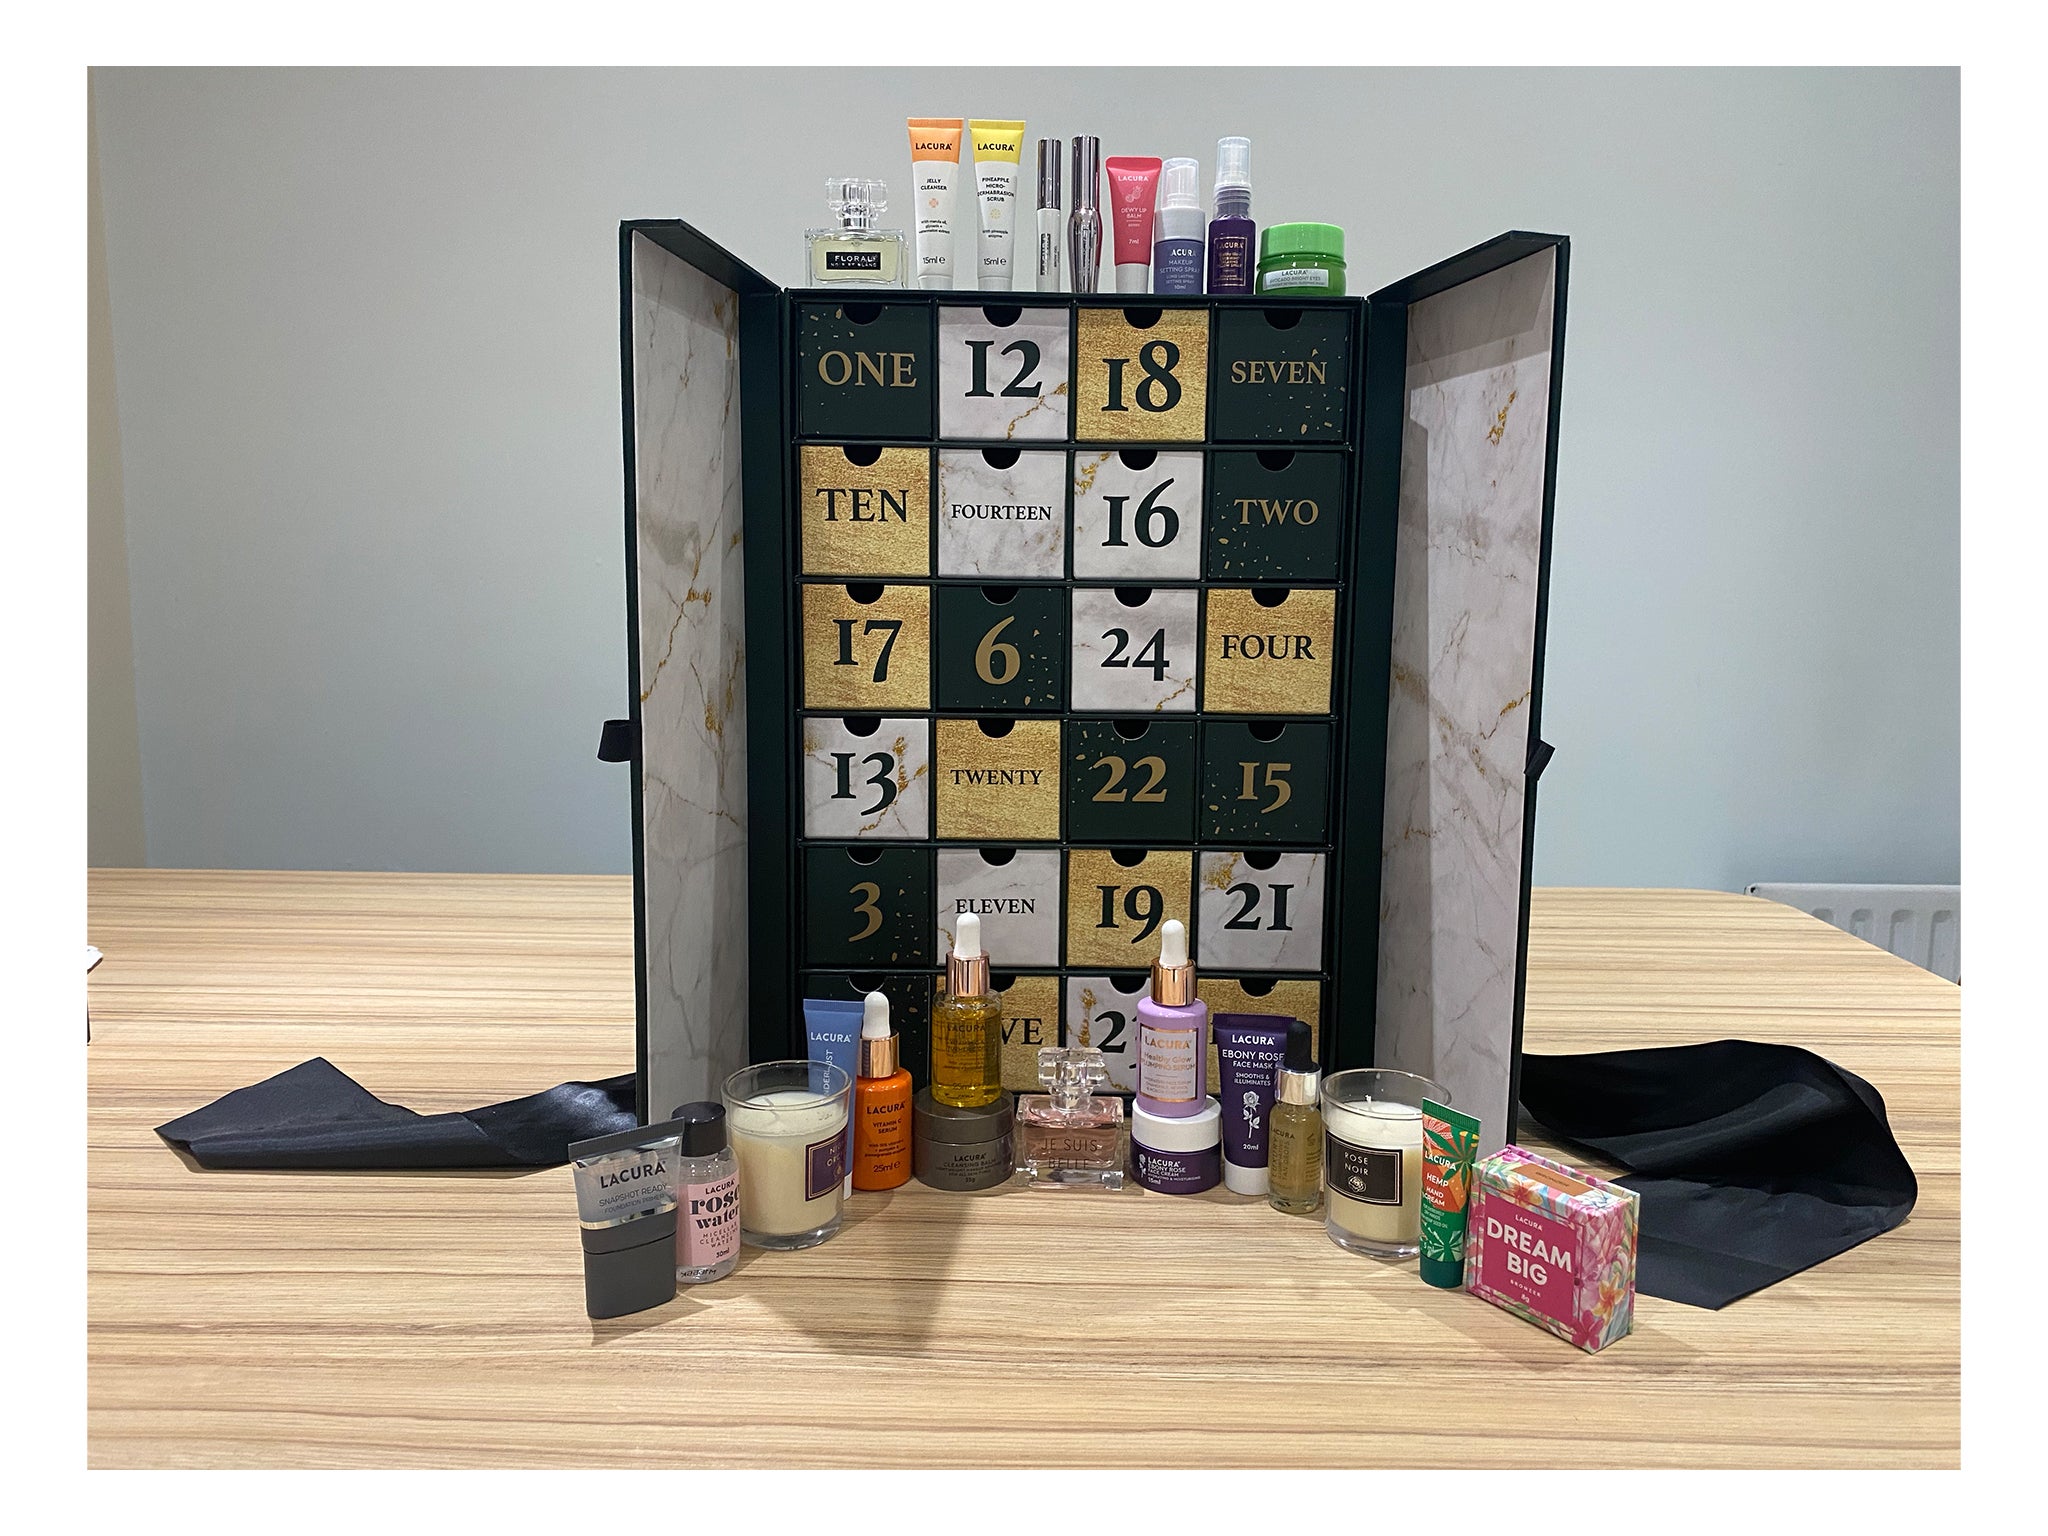 The calendar features 24 products